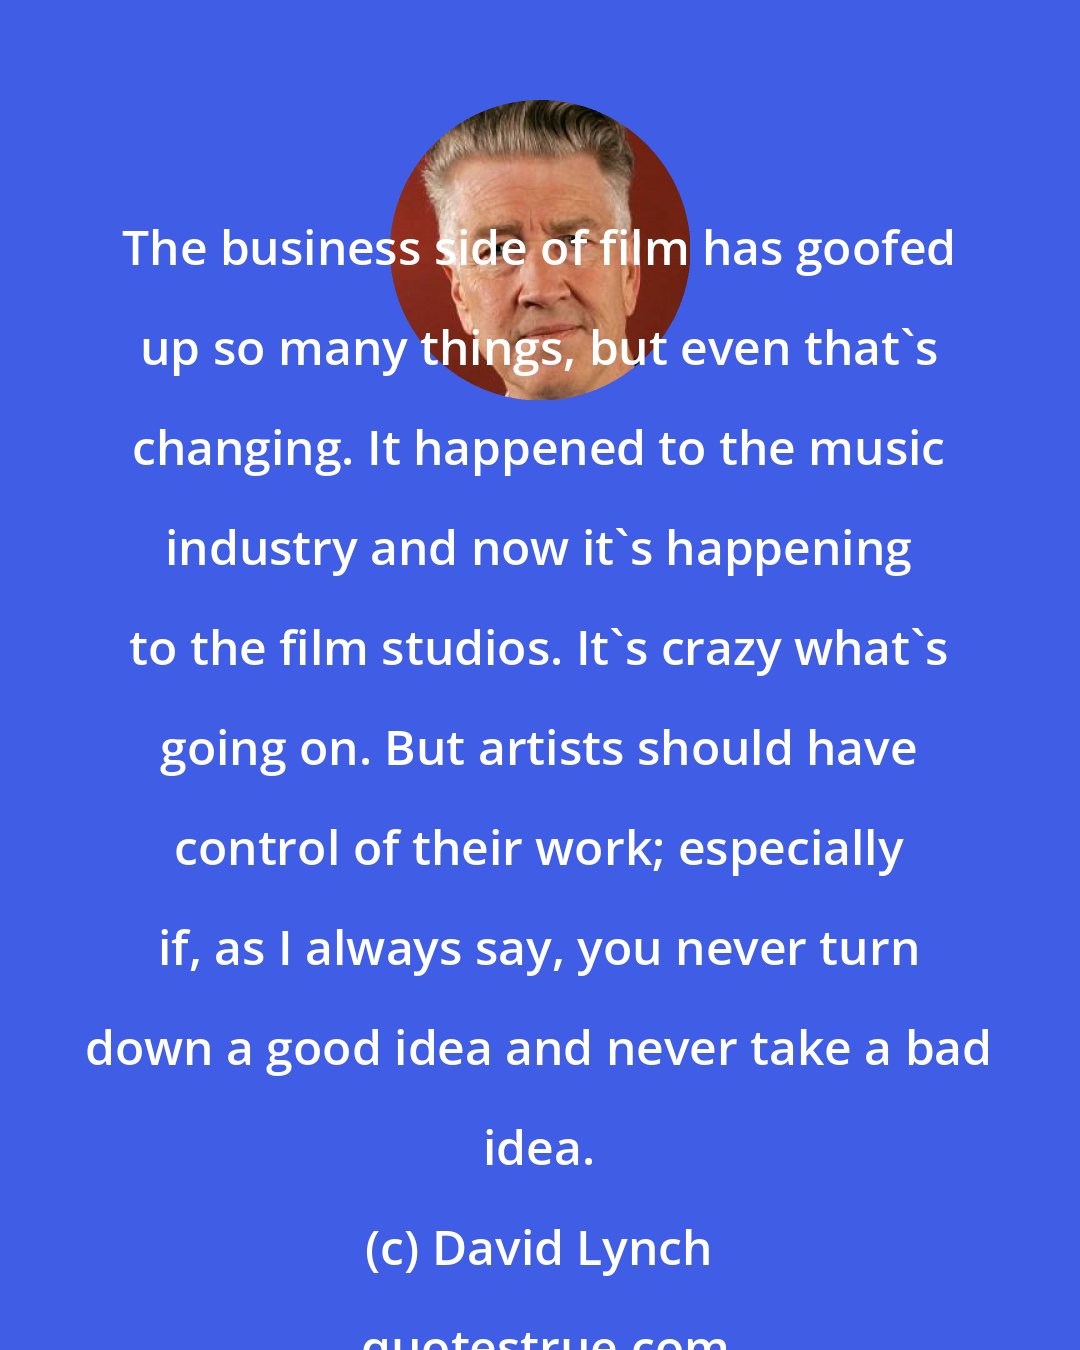 David Lynch: The business side of film has goofed up so many things, but even that's changing. It happened to the music industry and now it's happening to the film studios. It's crazy what's going on. But artists should have control of their work; especially if, as I always say, you never turn down a good idea and never take a bad idea.